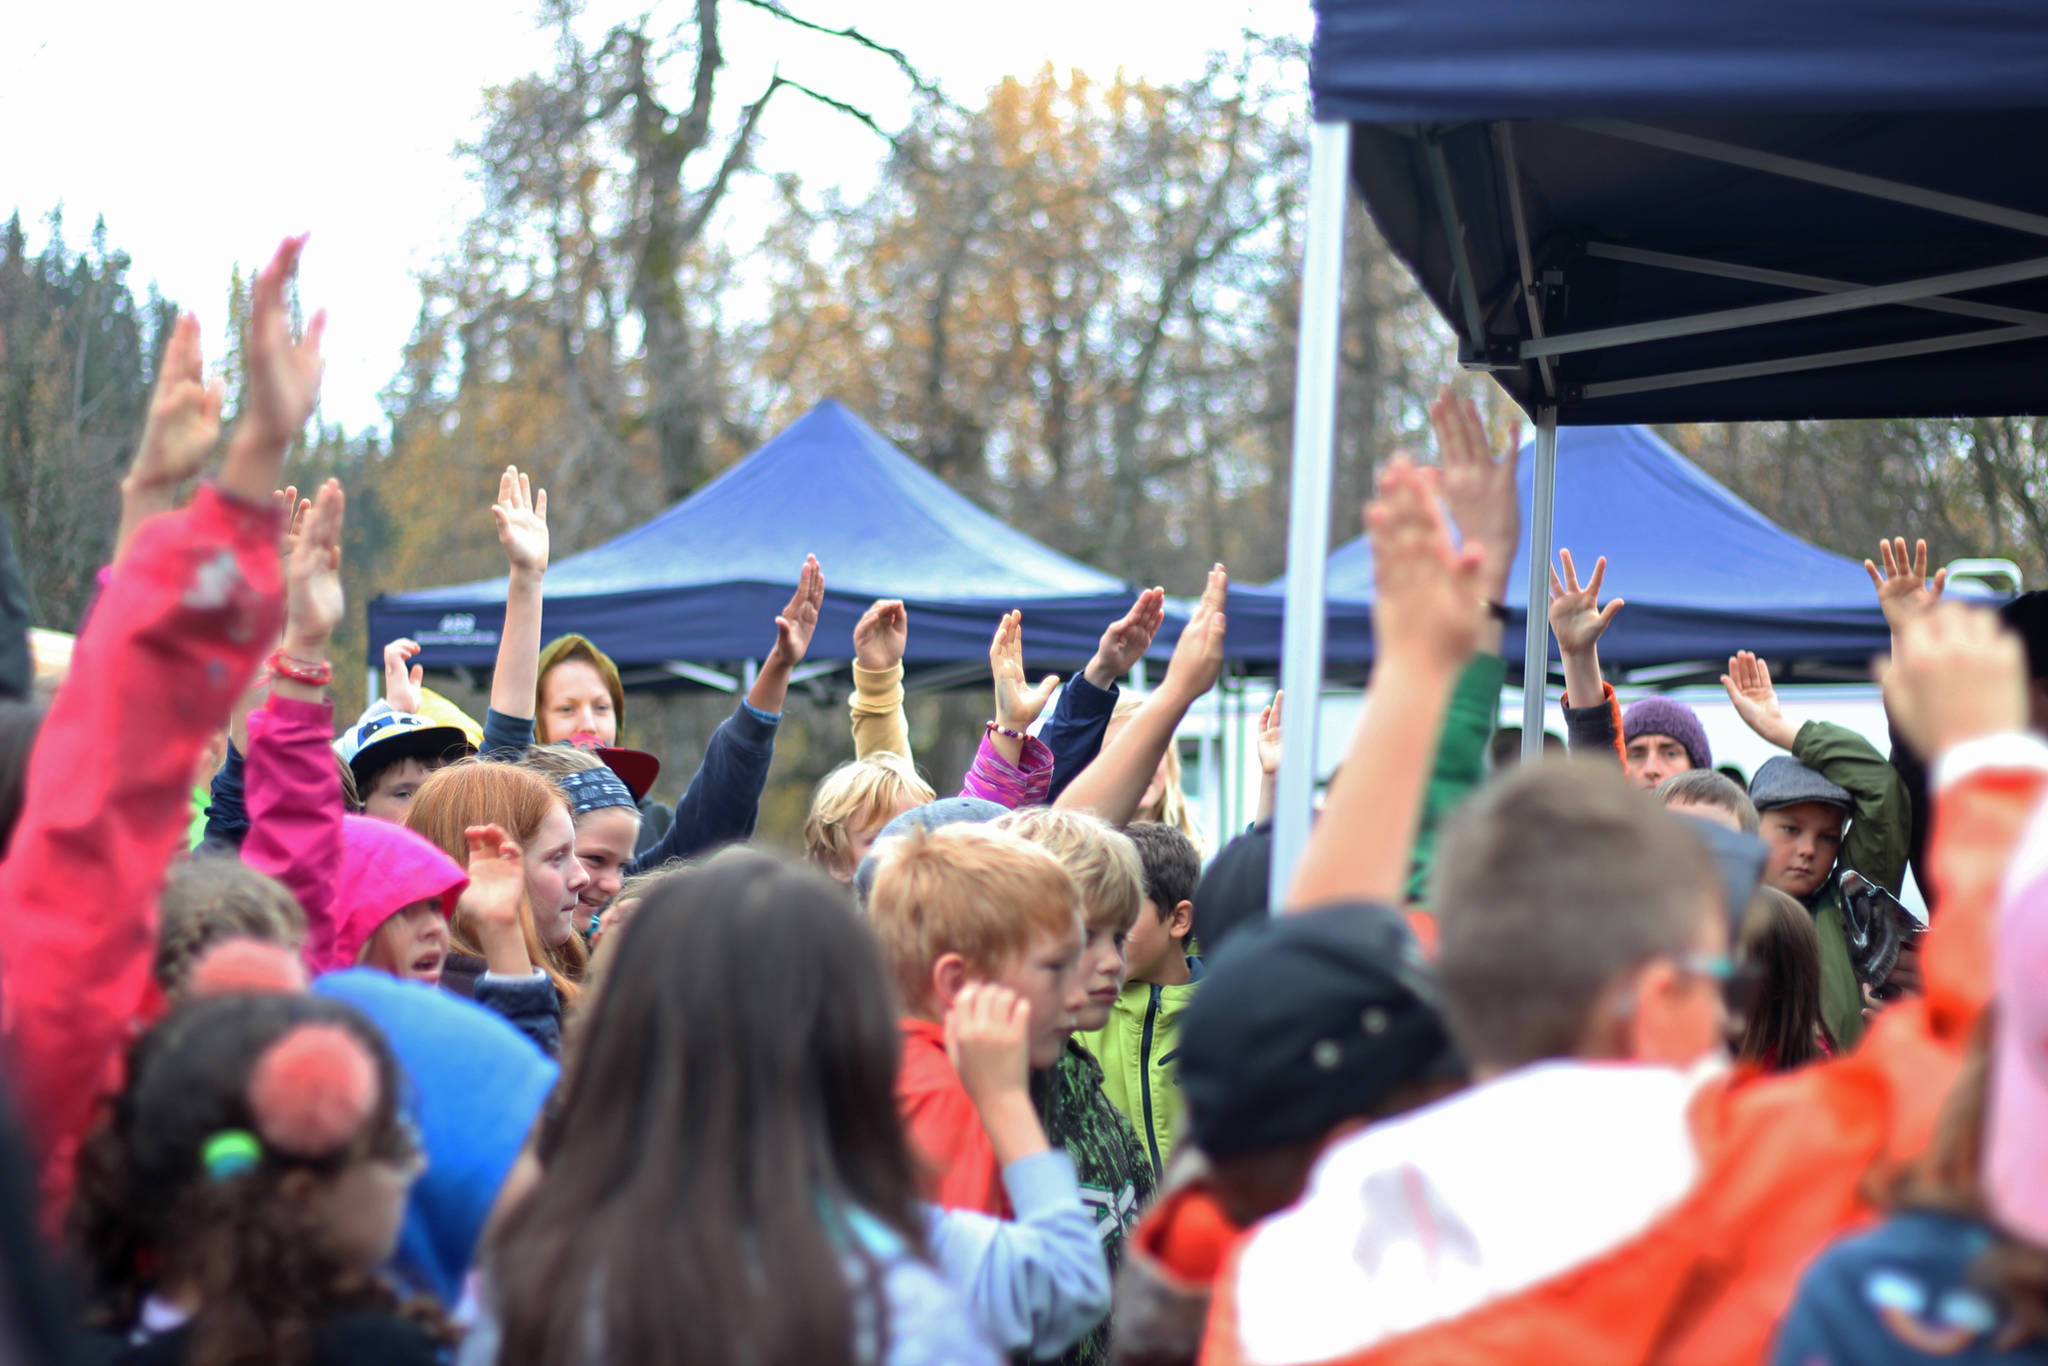 Students from Chapman School and Fireweed Academy raise their hands to answer a question about salmon during an educational egg take trip Thursday, Oct. 4, 2018 at the Anchor River in Anchor Point, Alaska. (Photo by Megan Pacer/Homer News)